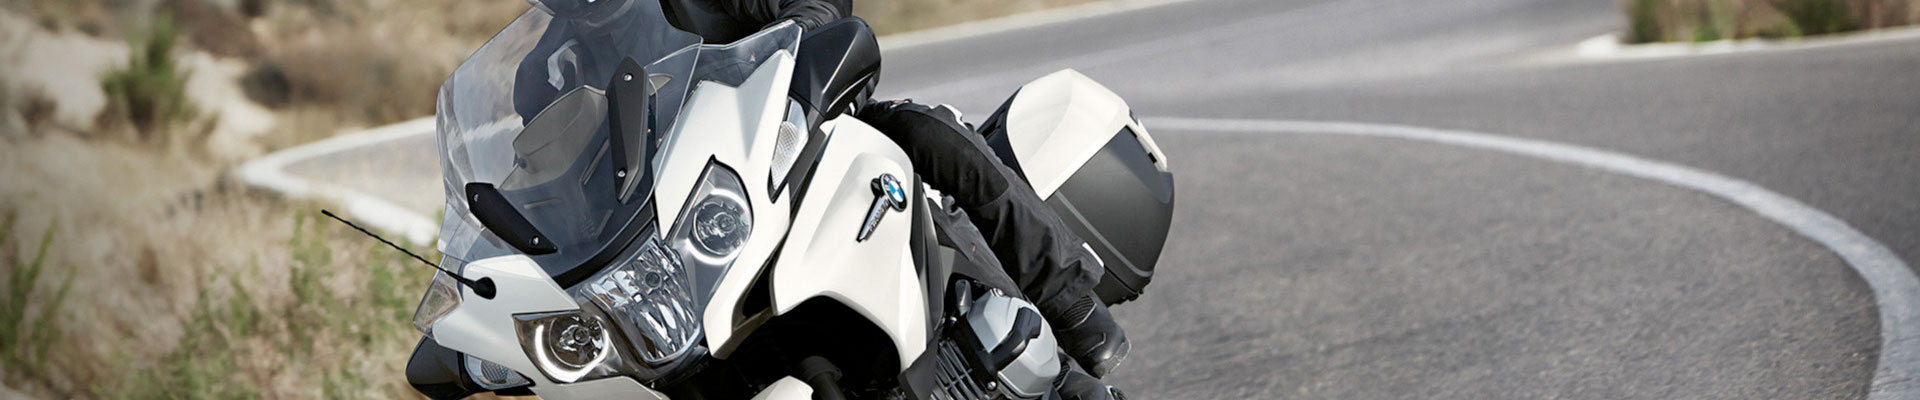 About Us | Phone (951) 353-0607 | BMW Motorcycles of Riverside